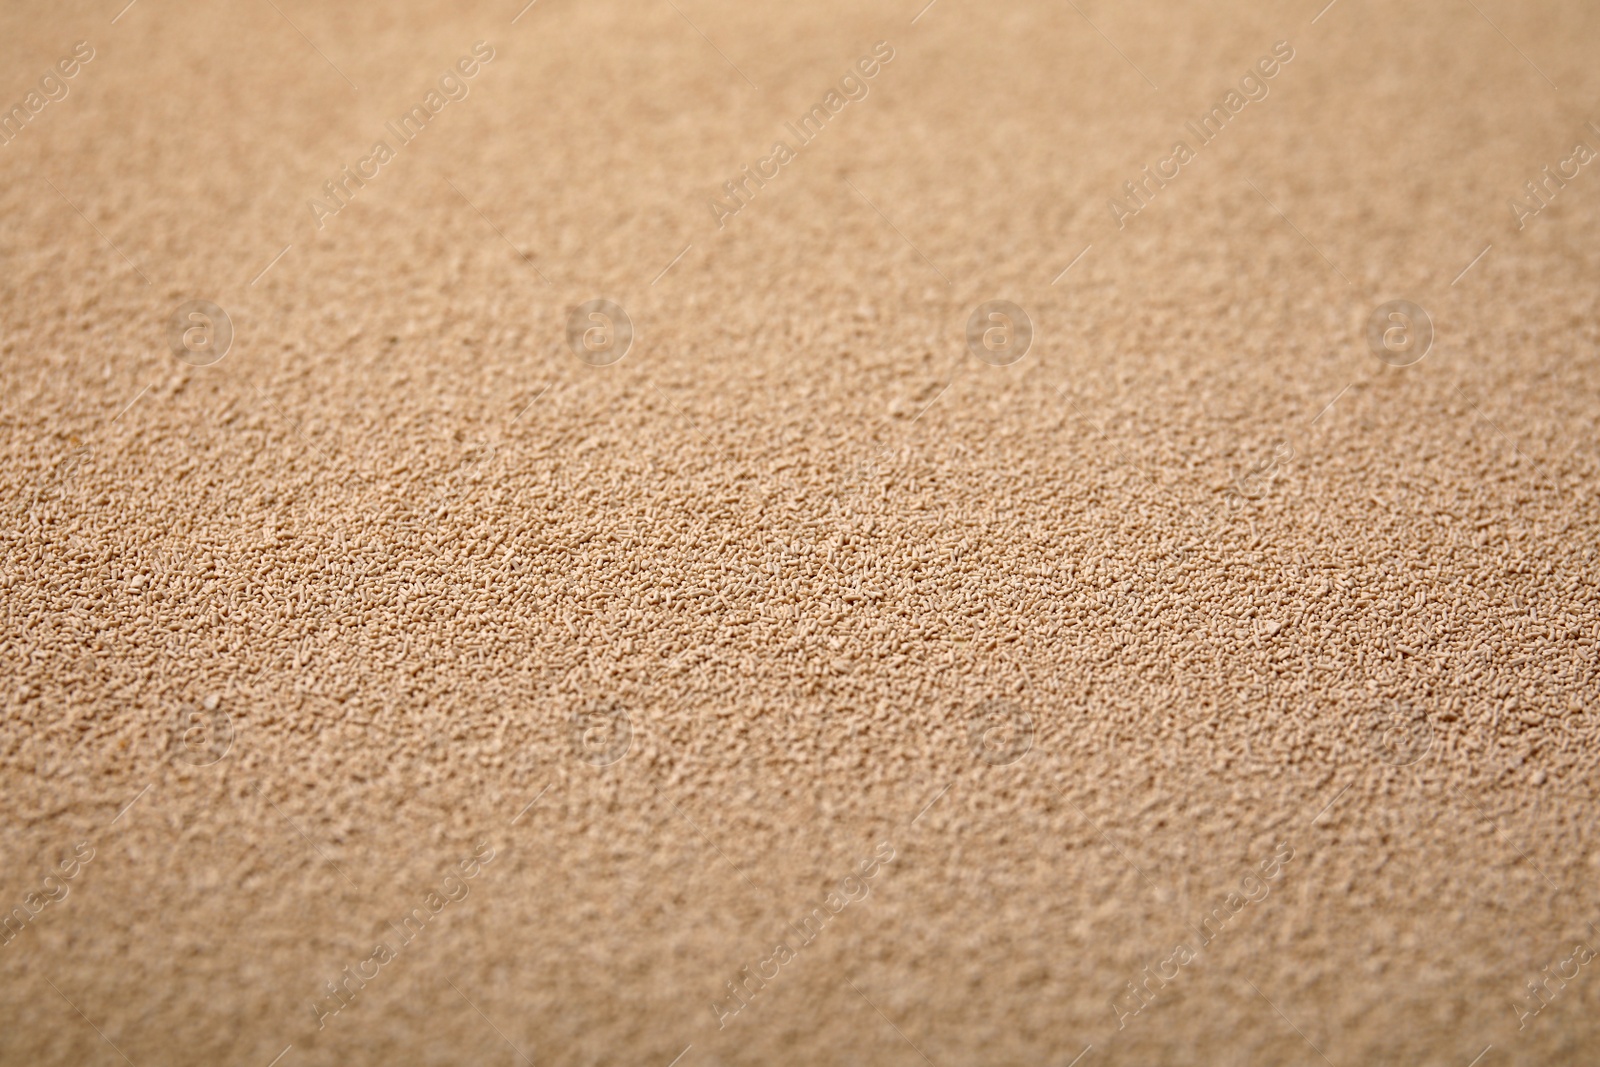 Photo of Granulated yeast as background, closeup view. Ingredient for baking